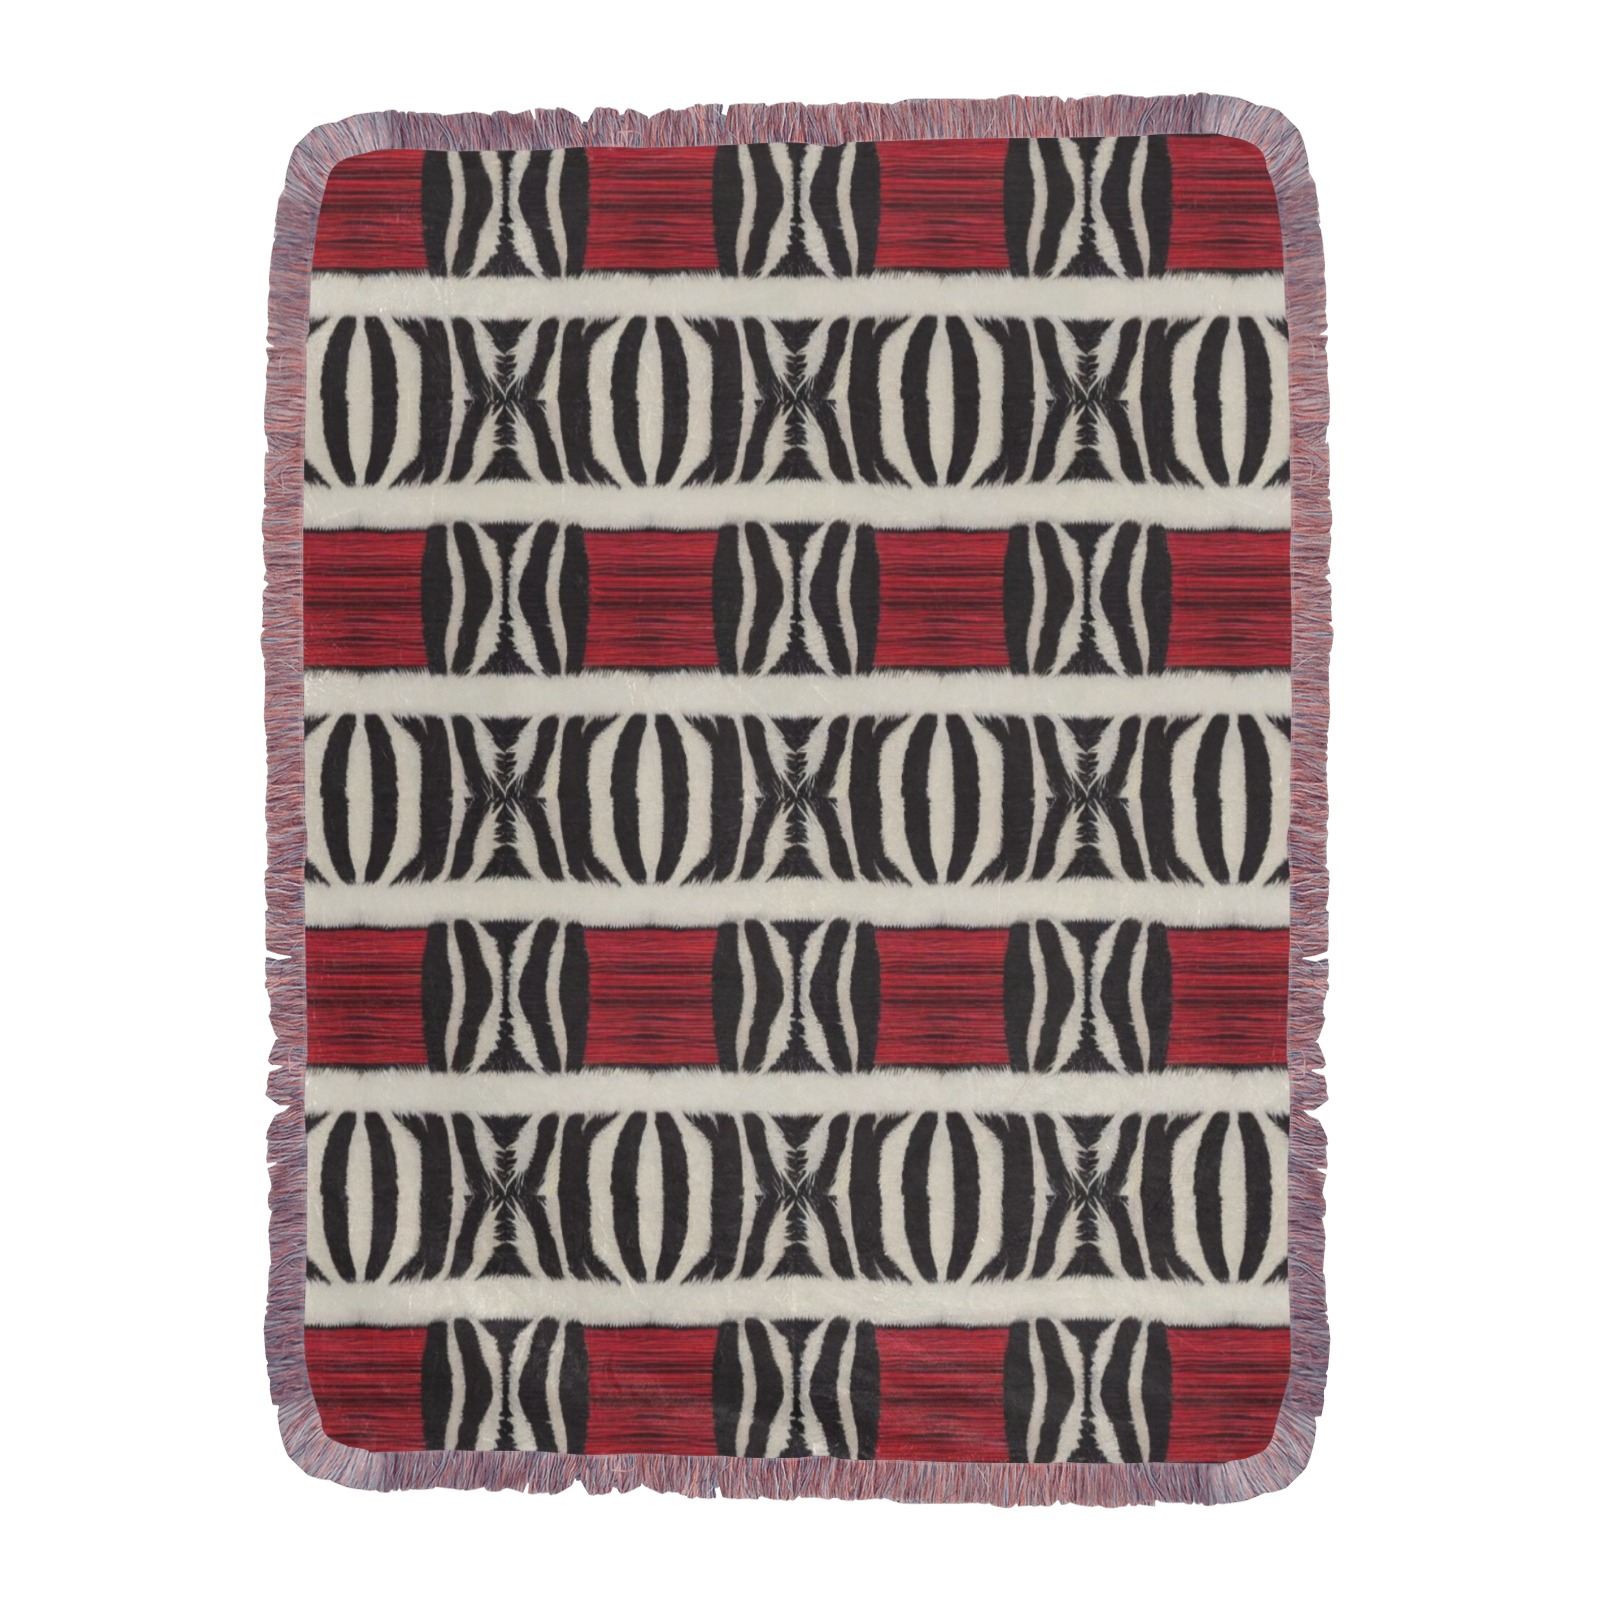 repeating pattern black and white zebra print with red Ultra-Soft Fringe Blanket 60"x80" (Mixed Pink)